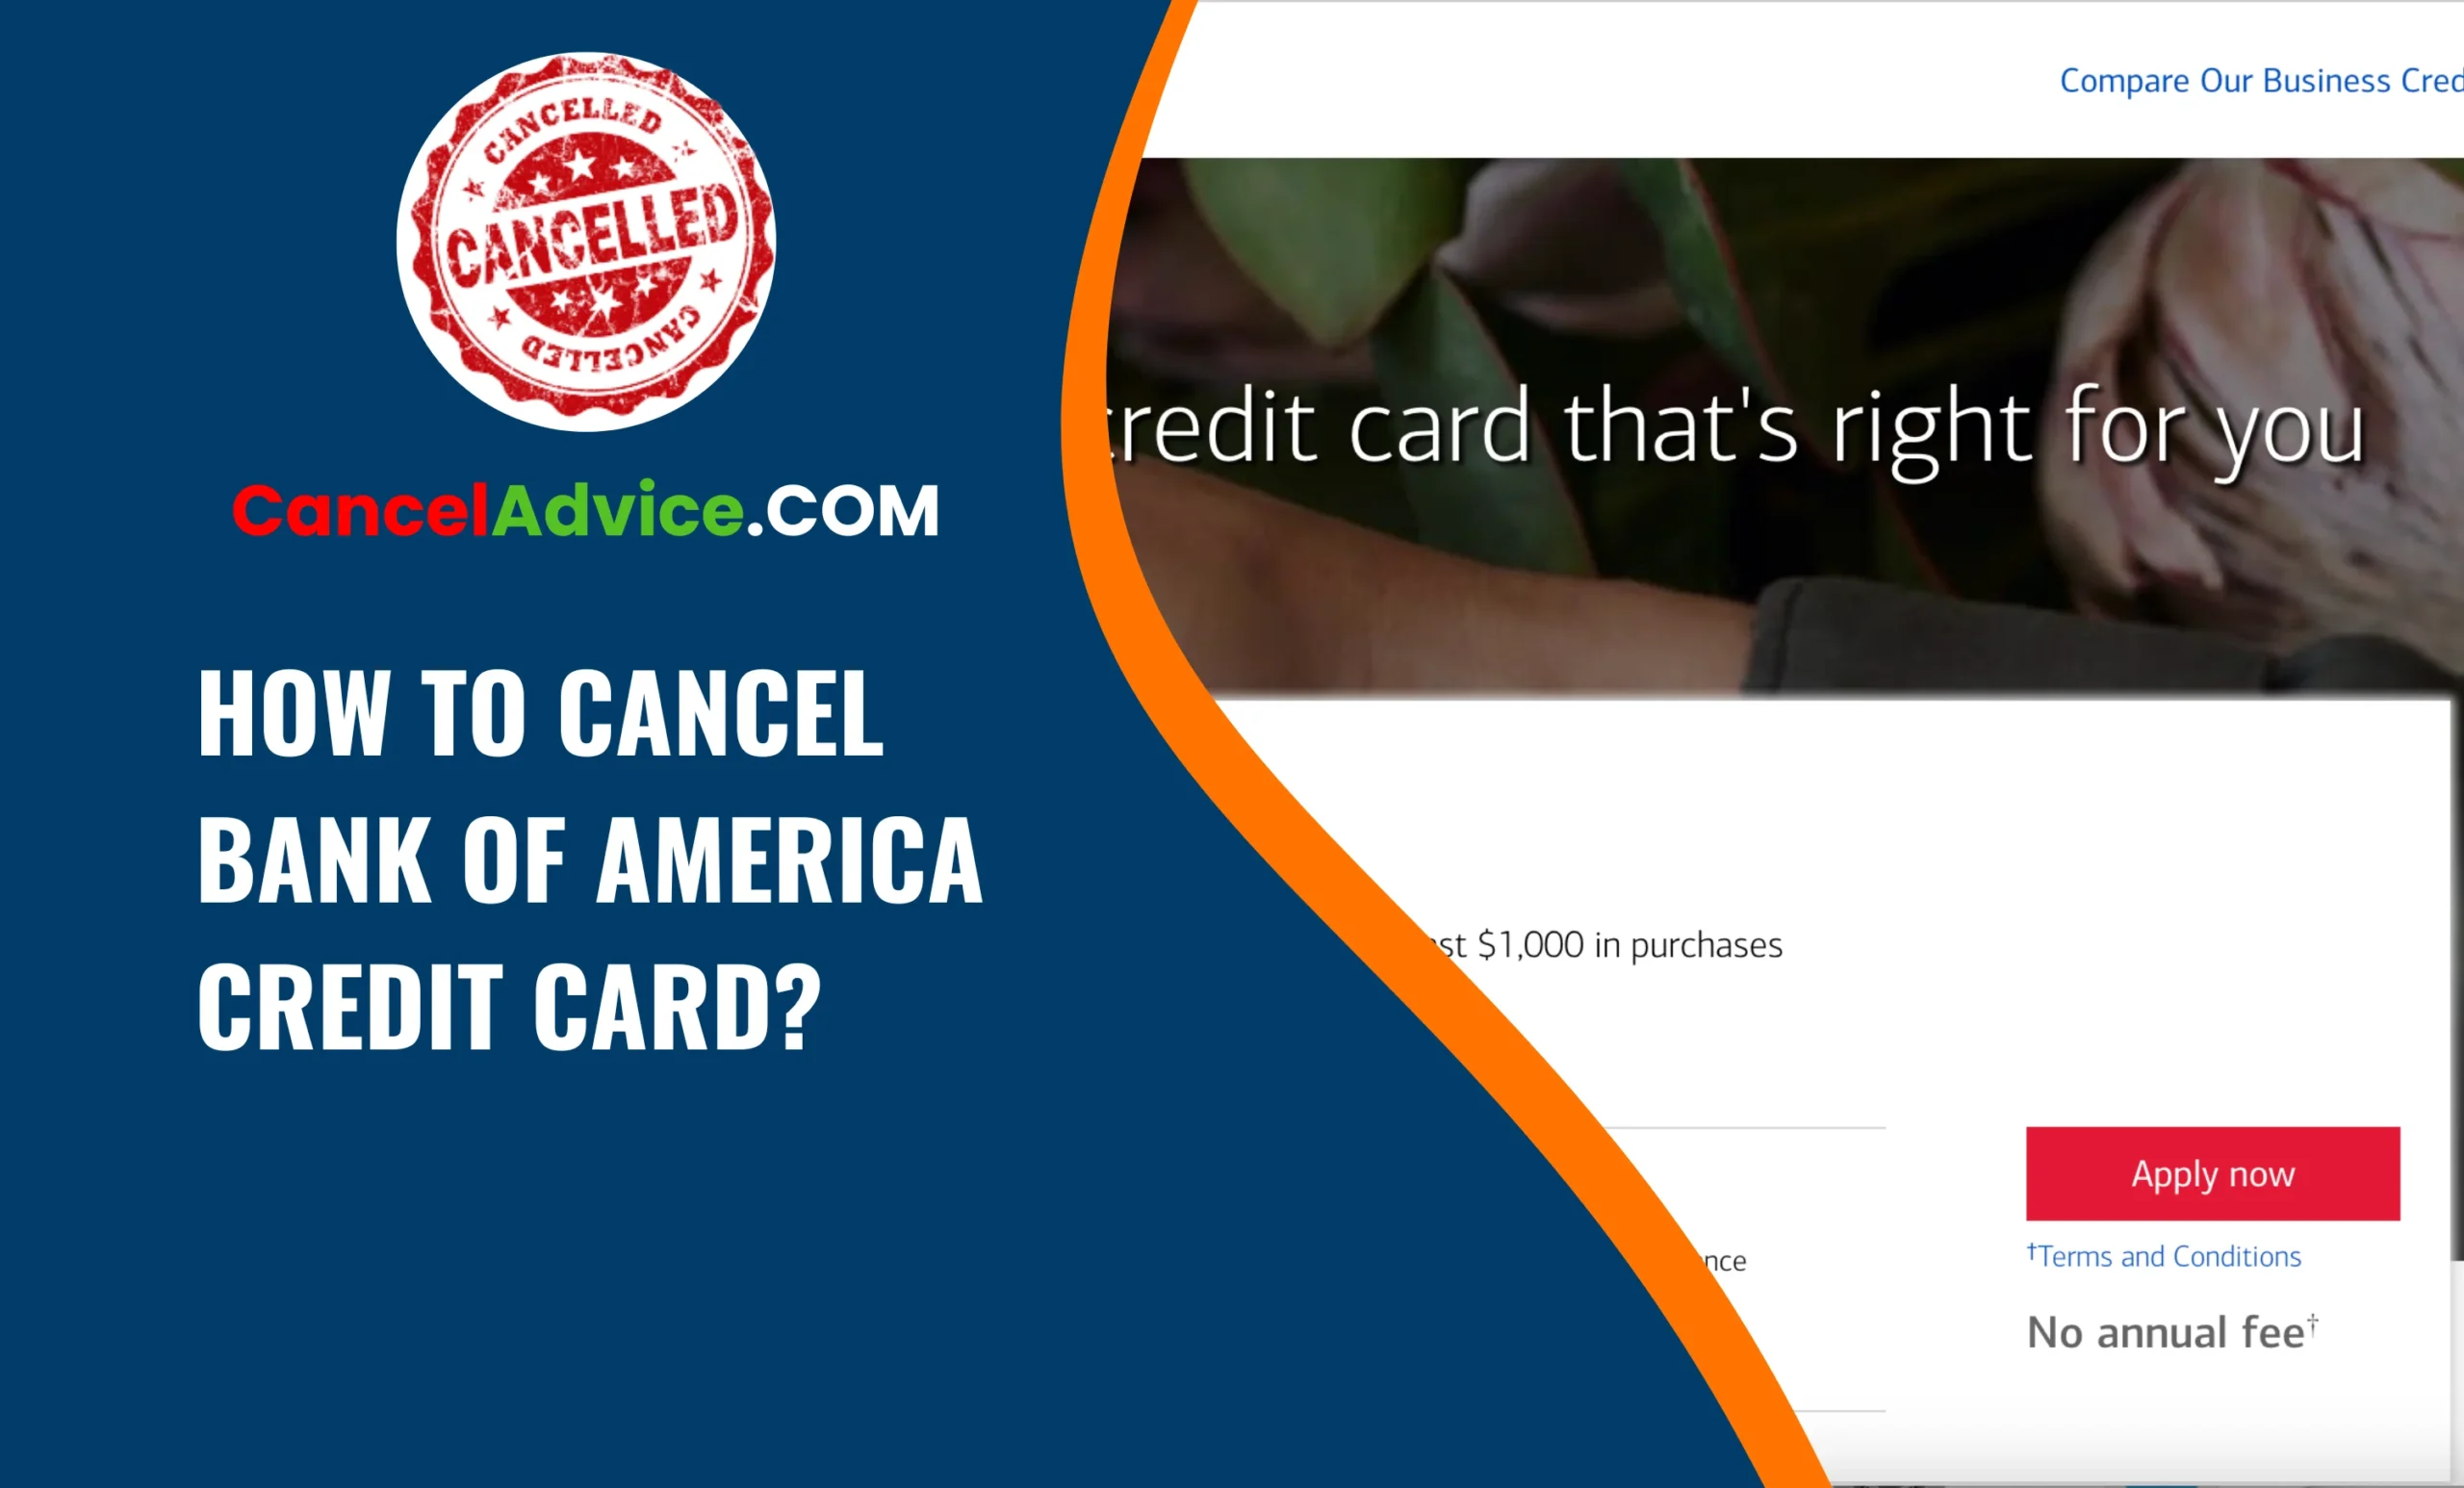 How to Cancel Bank of America Credit Card